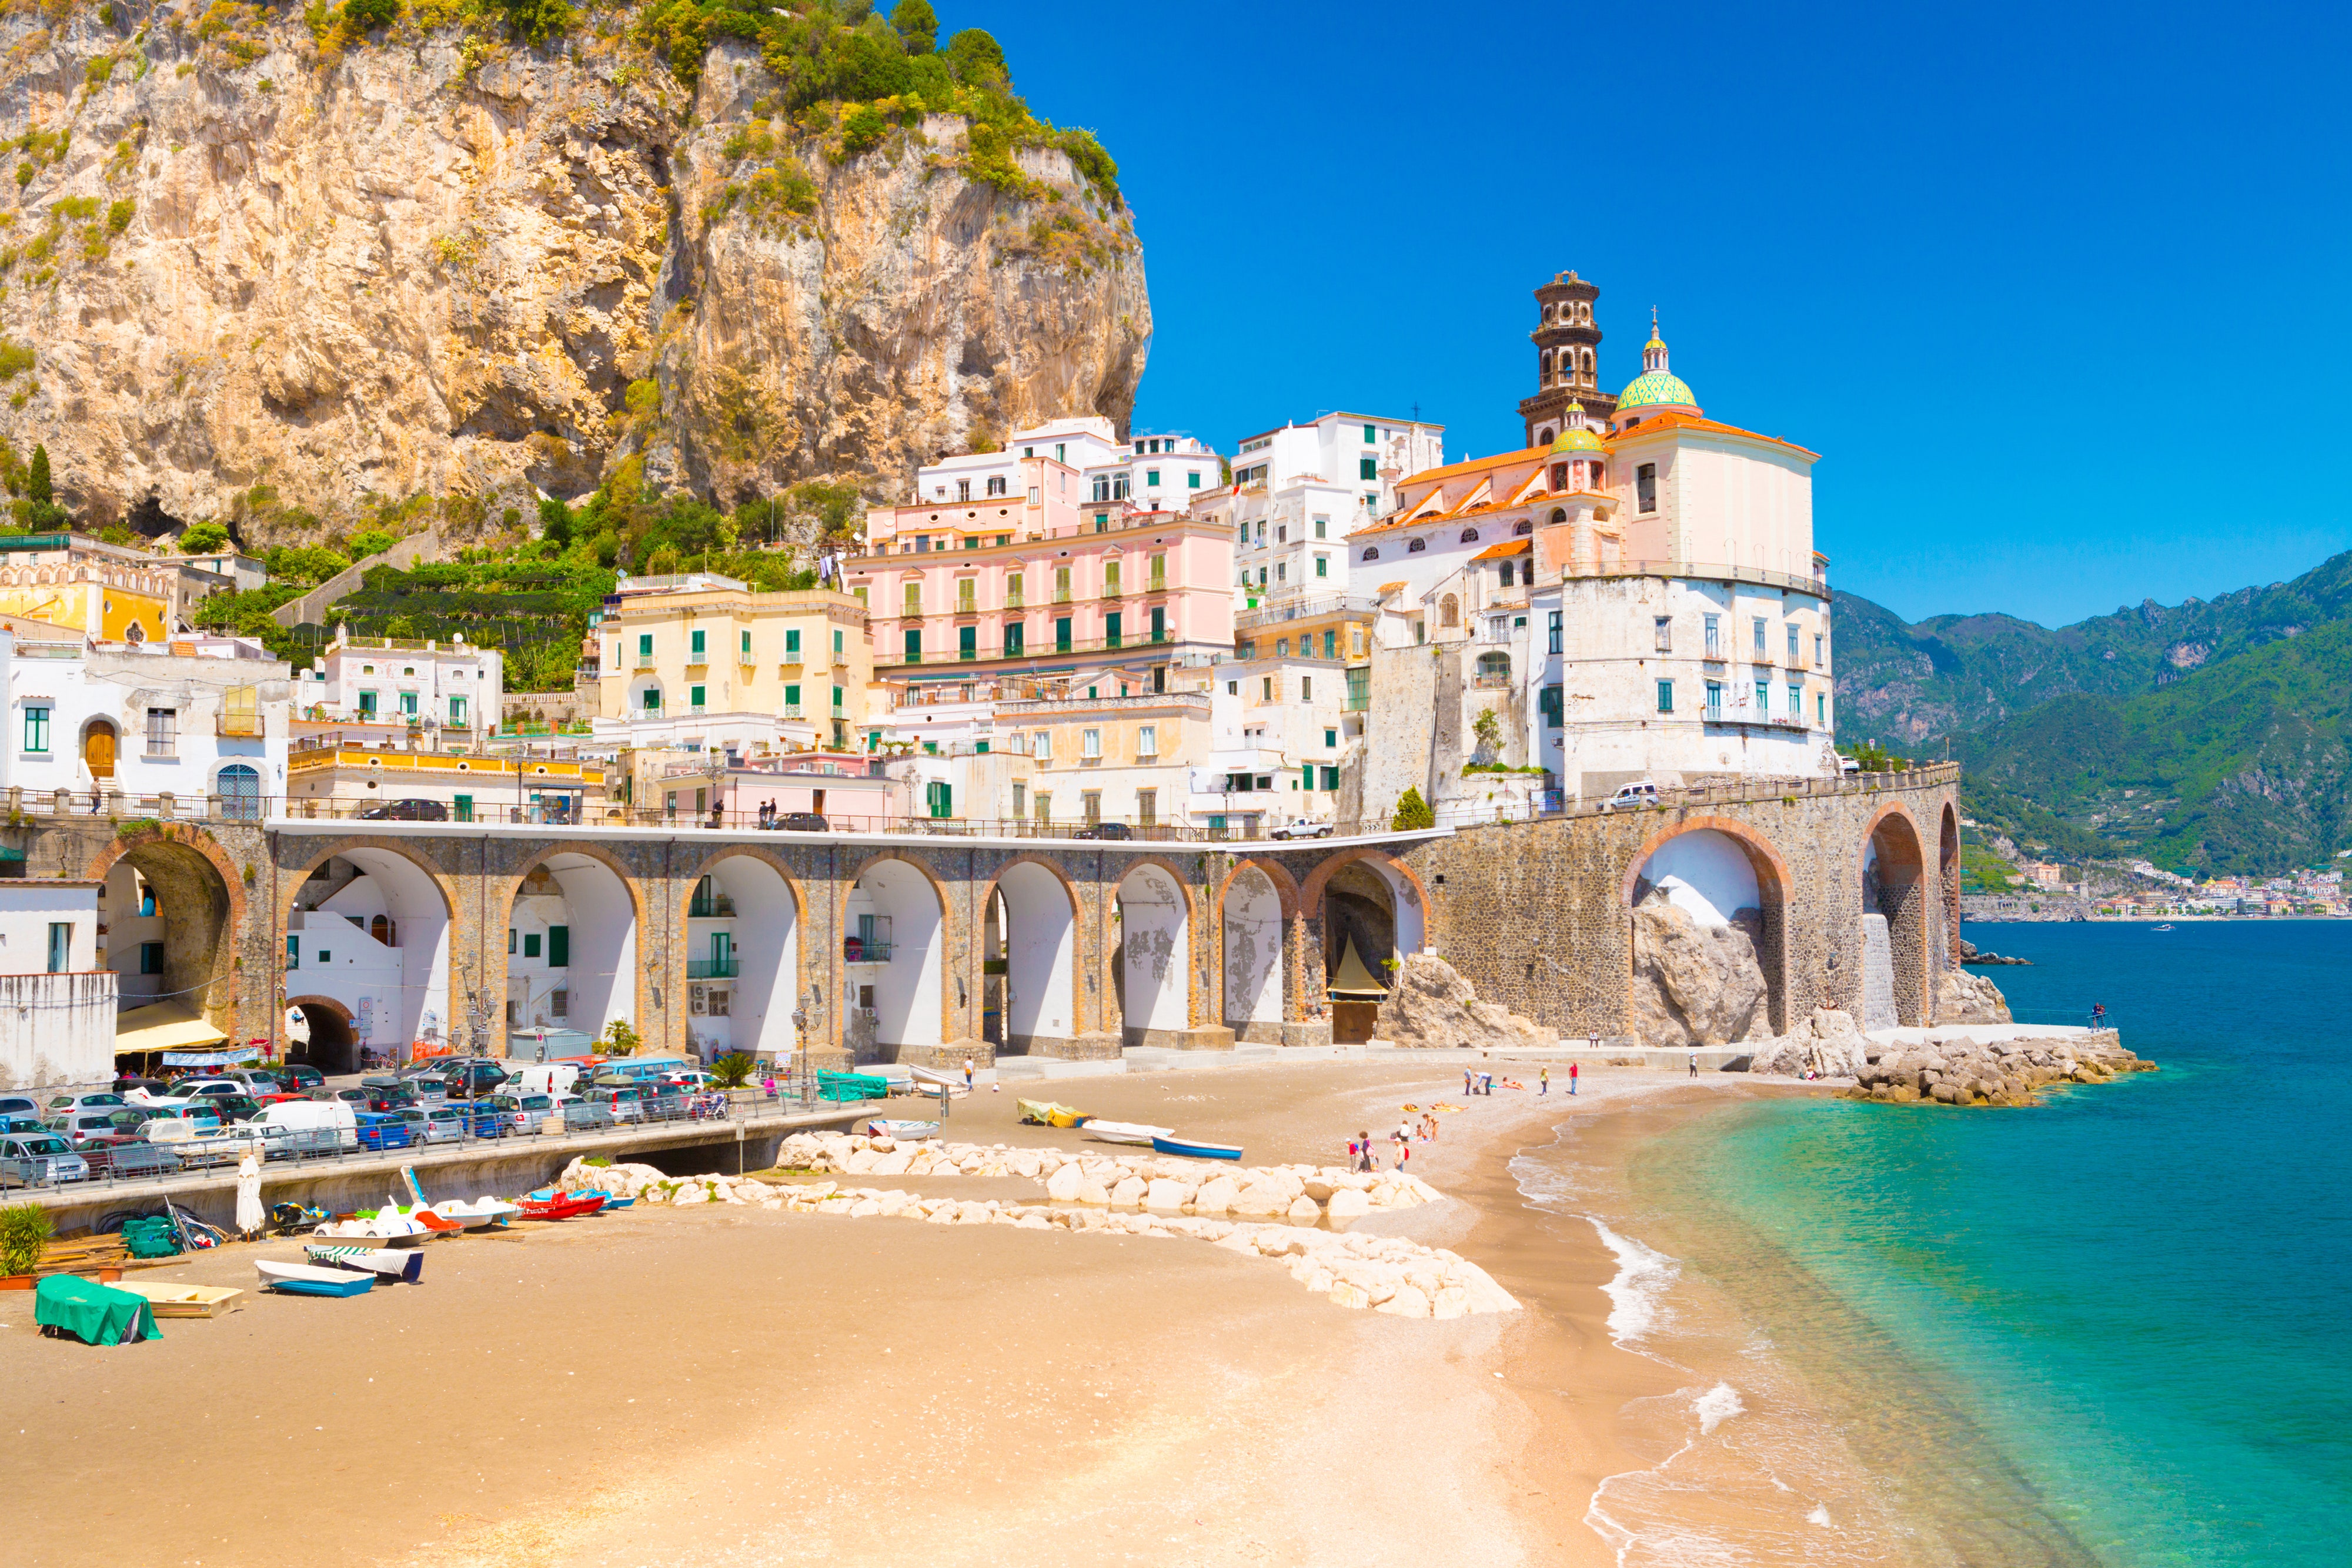 <p>Located along the <a href="https://www.cntraveler.com/story/timeless-allure-amalfi-coast?mbid=synd_msn_rss&utm_source=msn&utm_medium=syndication">Amalfi Coast</a>, small picturesque Atrani is reminiscent of Italy's most famous coastal hot spots (think Positano, Capri, et al.)—just much less crowded. Aside from its beautiful churches, lively piazzas, and colorful cliffside perch in the province of Salerno, Atrani has a pale-sand beach flush against the Tyrrhenian Sea.</p> <p>Get here by bus or ferry from <a href="https://www.cntraveler.com/gallery/best-hotels-in-naples?mbid=synd_msn_rss&utm_source=msn&utm_medium=syndication">Naples</a>; both are two hour trips that end in with a stunning reward: The views of the water bookended by two cliffs are hard to beat. In need of a spot to bed down? Book the <a href="https://www.cntraveler.com/hotels/italy/nh-collection-grand-hotel-convento-di-amalfi?mbid=synd_msn_rss&utm_source=msn&utm_medium=syndication">Anantara Convento di Amalfi Grand Hotel</a>, situated in a former monastery, and you’ll be treated to a truly religious experience.</p><p>Sign up to receive the latest news, expert tips, and inspiration on all things travel</p><a href="https://www.cntraveler.com/newsletter/the-daily?sourceCode=msnsend">Inspire Me</a>